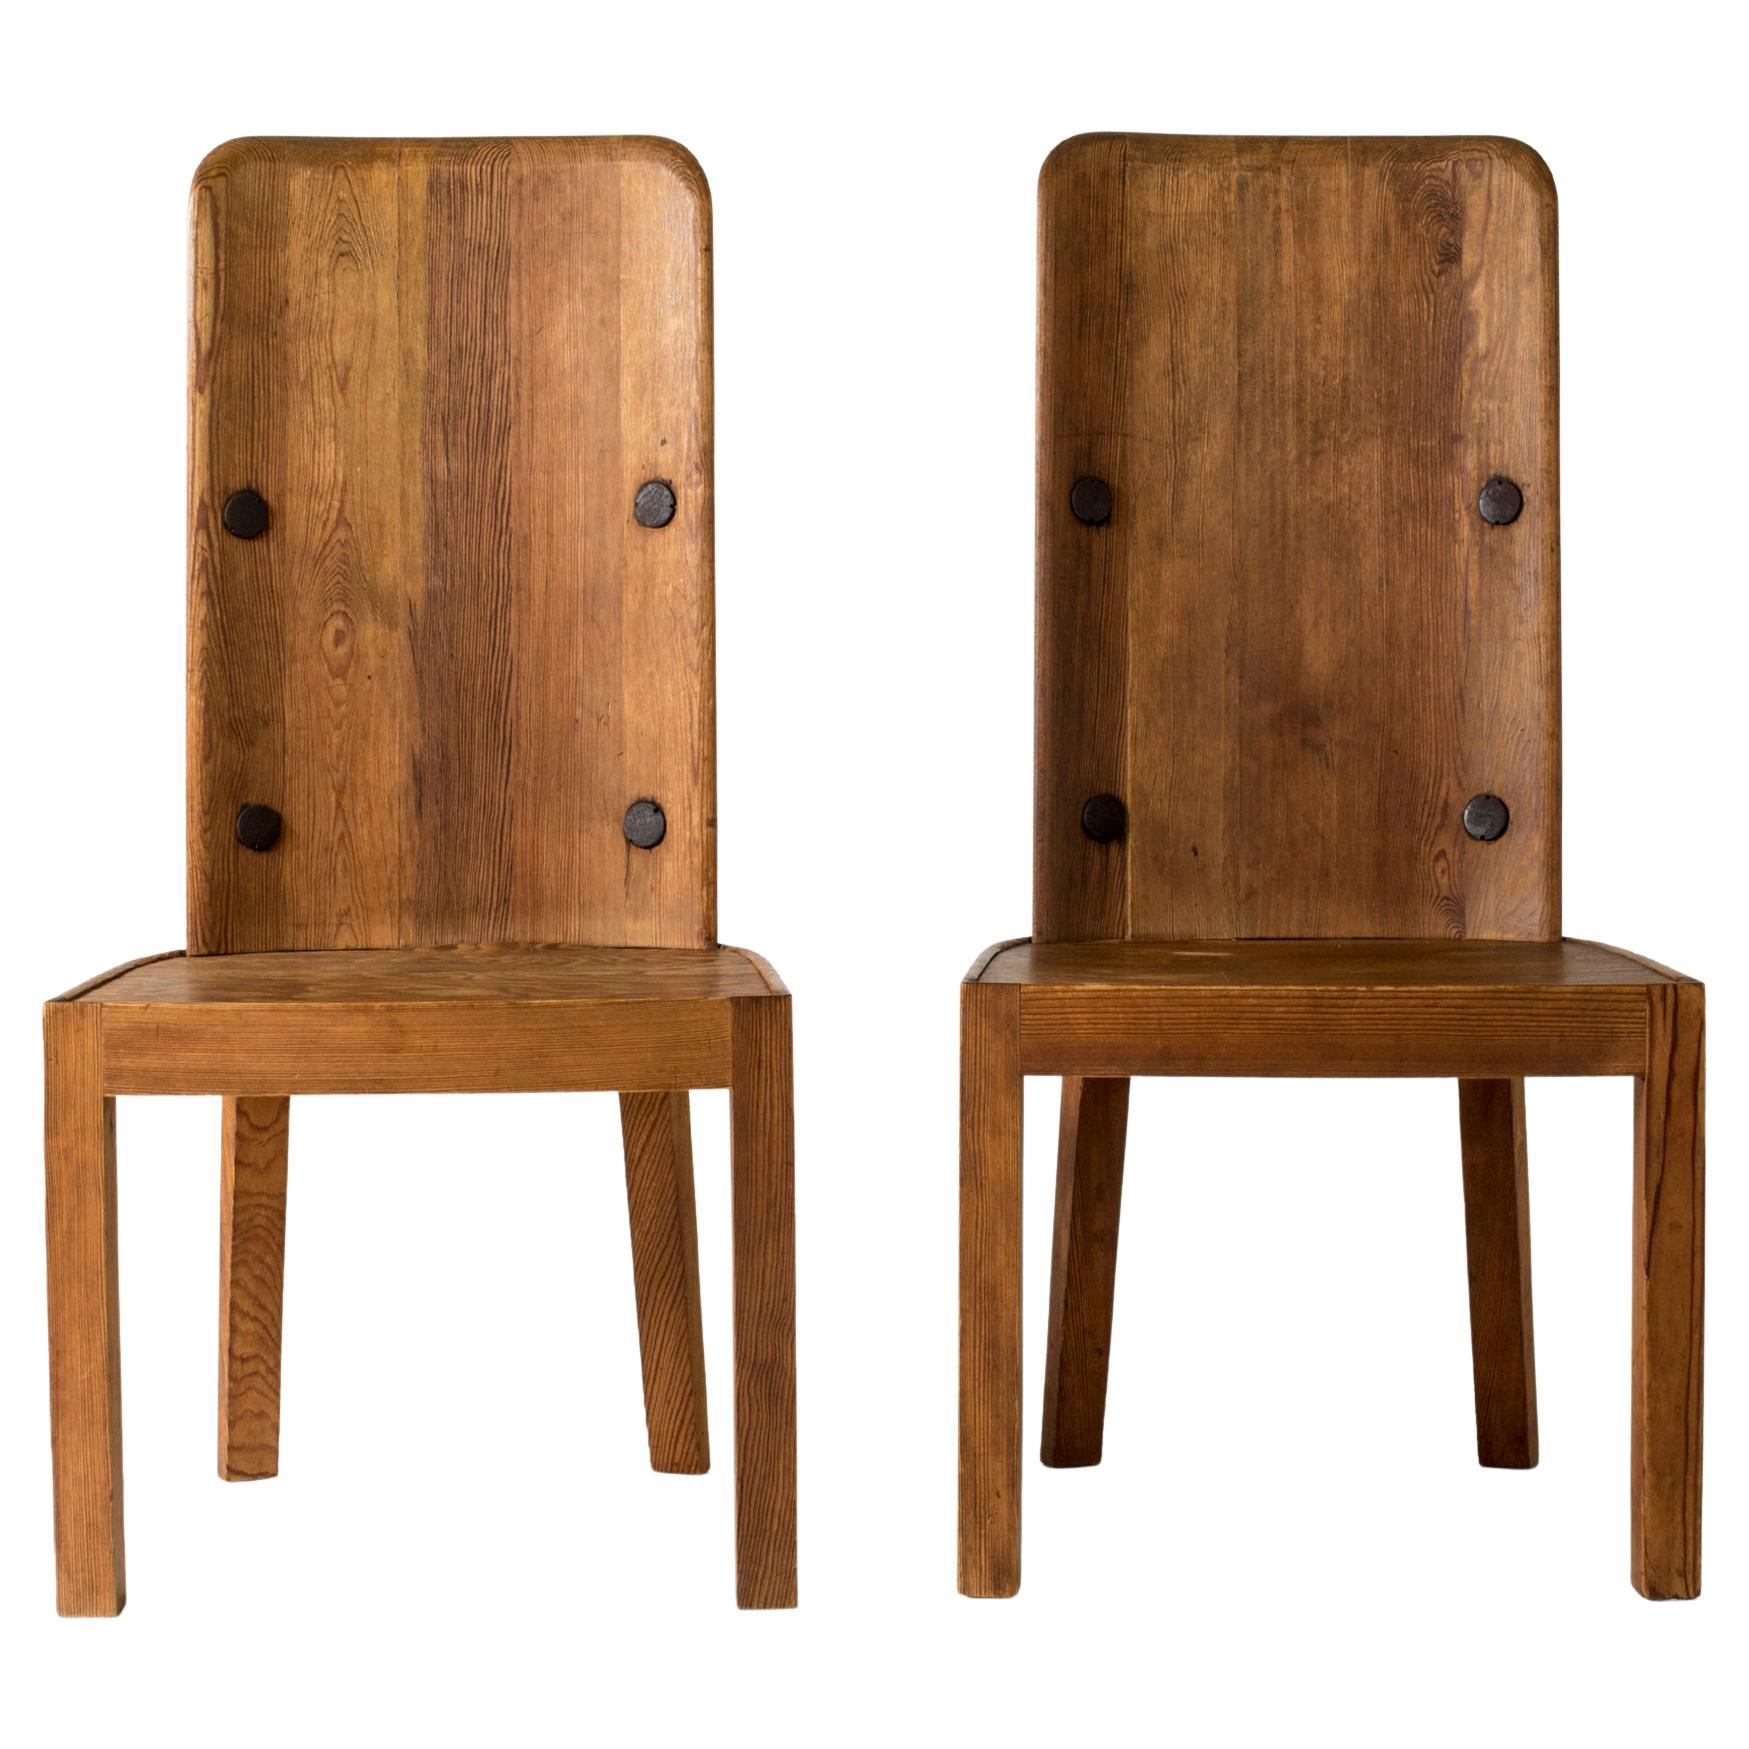 Pair of "Lovö" side chairs by Axel Einar Hjorth, NK, Sweden, 1930s